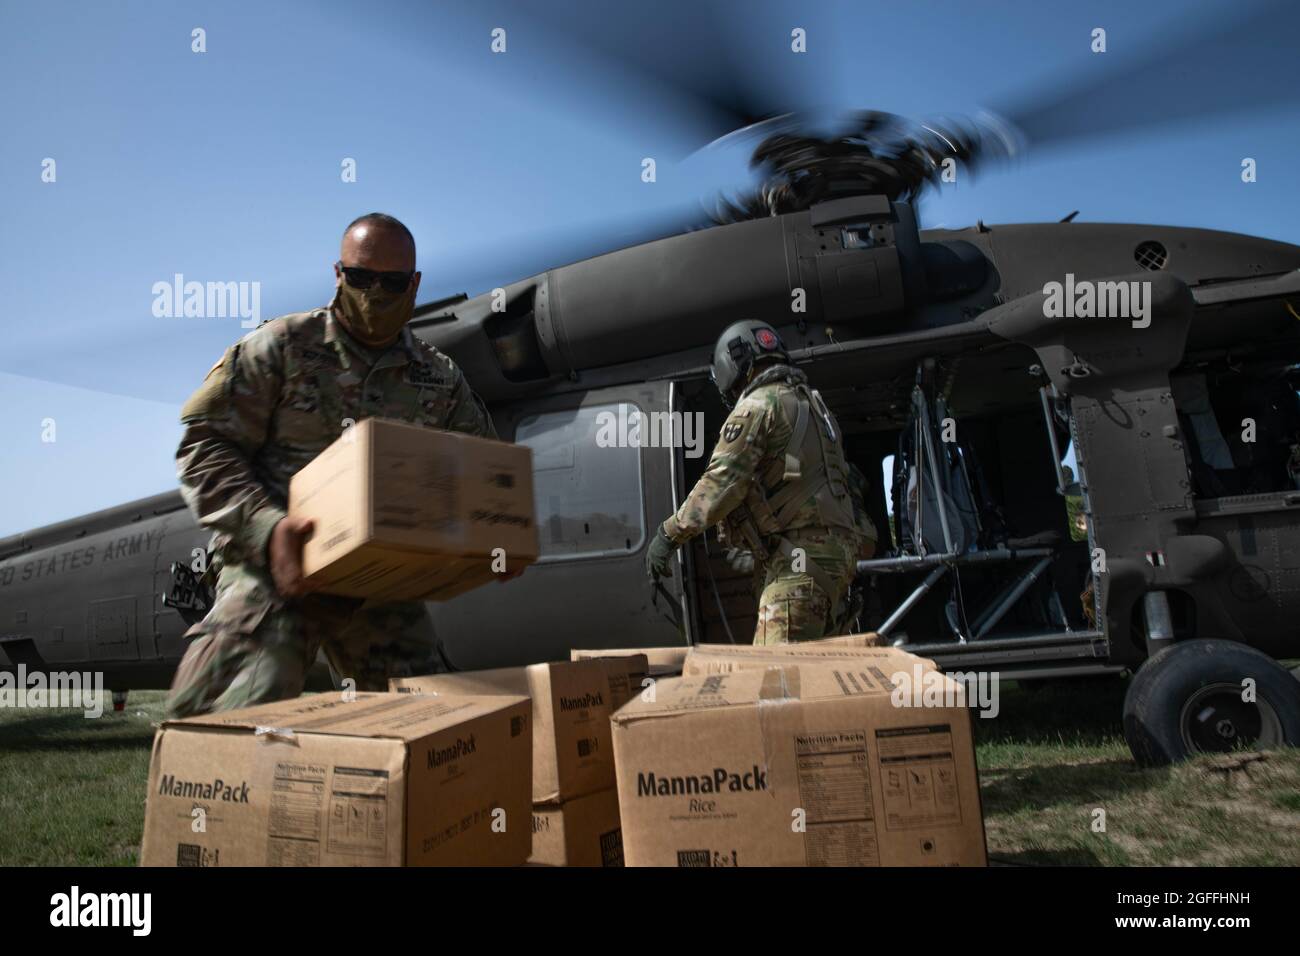 Anse Au Veau, Haiti. 24th Aug, 2021. U.S. Army Col. Samuel Agosto, assists with the unloading of food supplies during a humanitarian mission August 24, 2021 in Anse au Veau, Haiti. The military is assisting in the aftermath of the recent earthquake. Credit: Planetpix/Alamy Live News Stock Photo